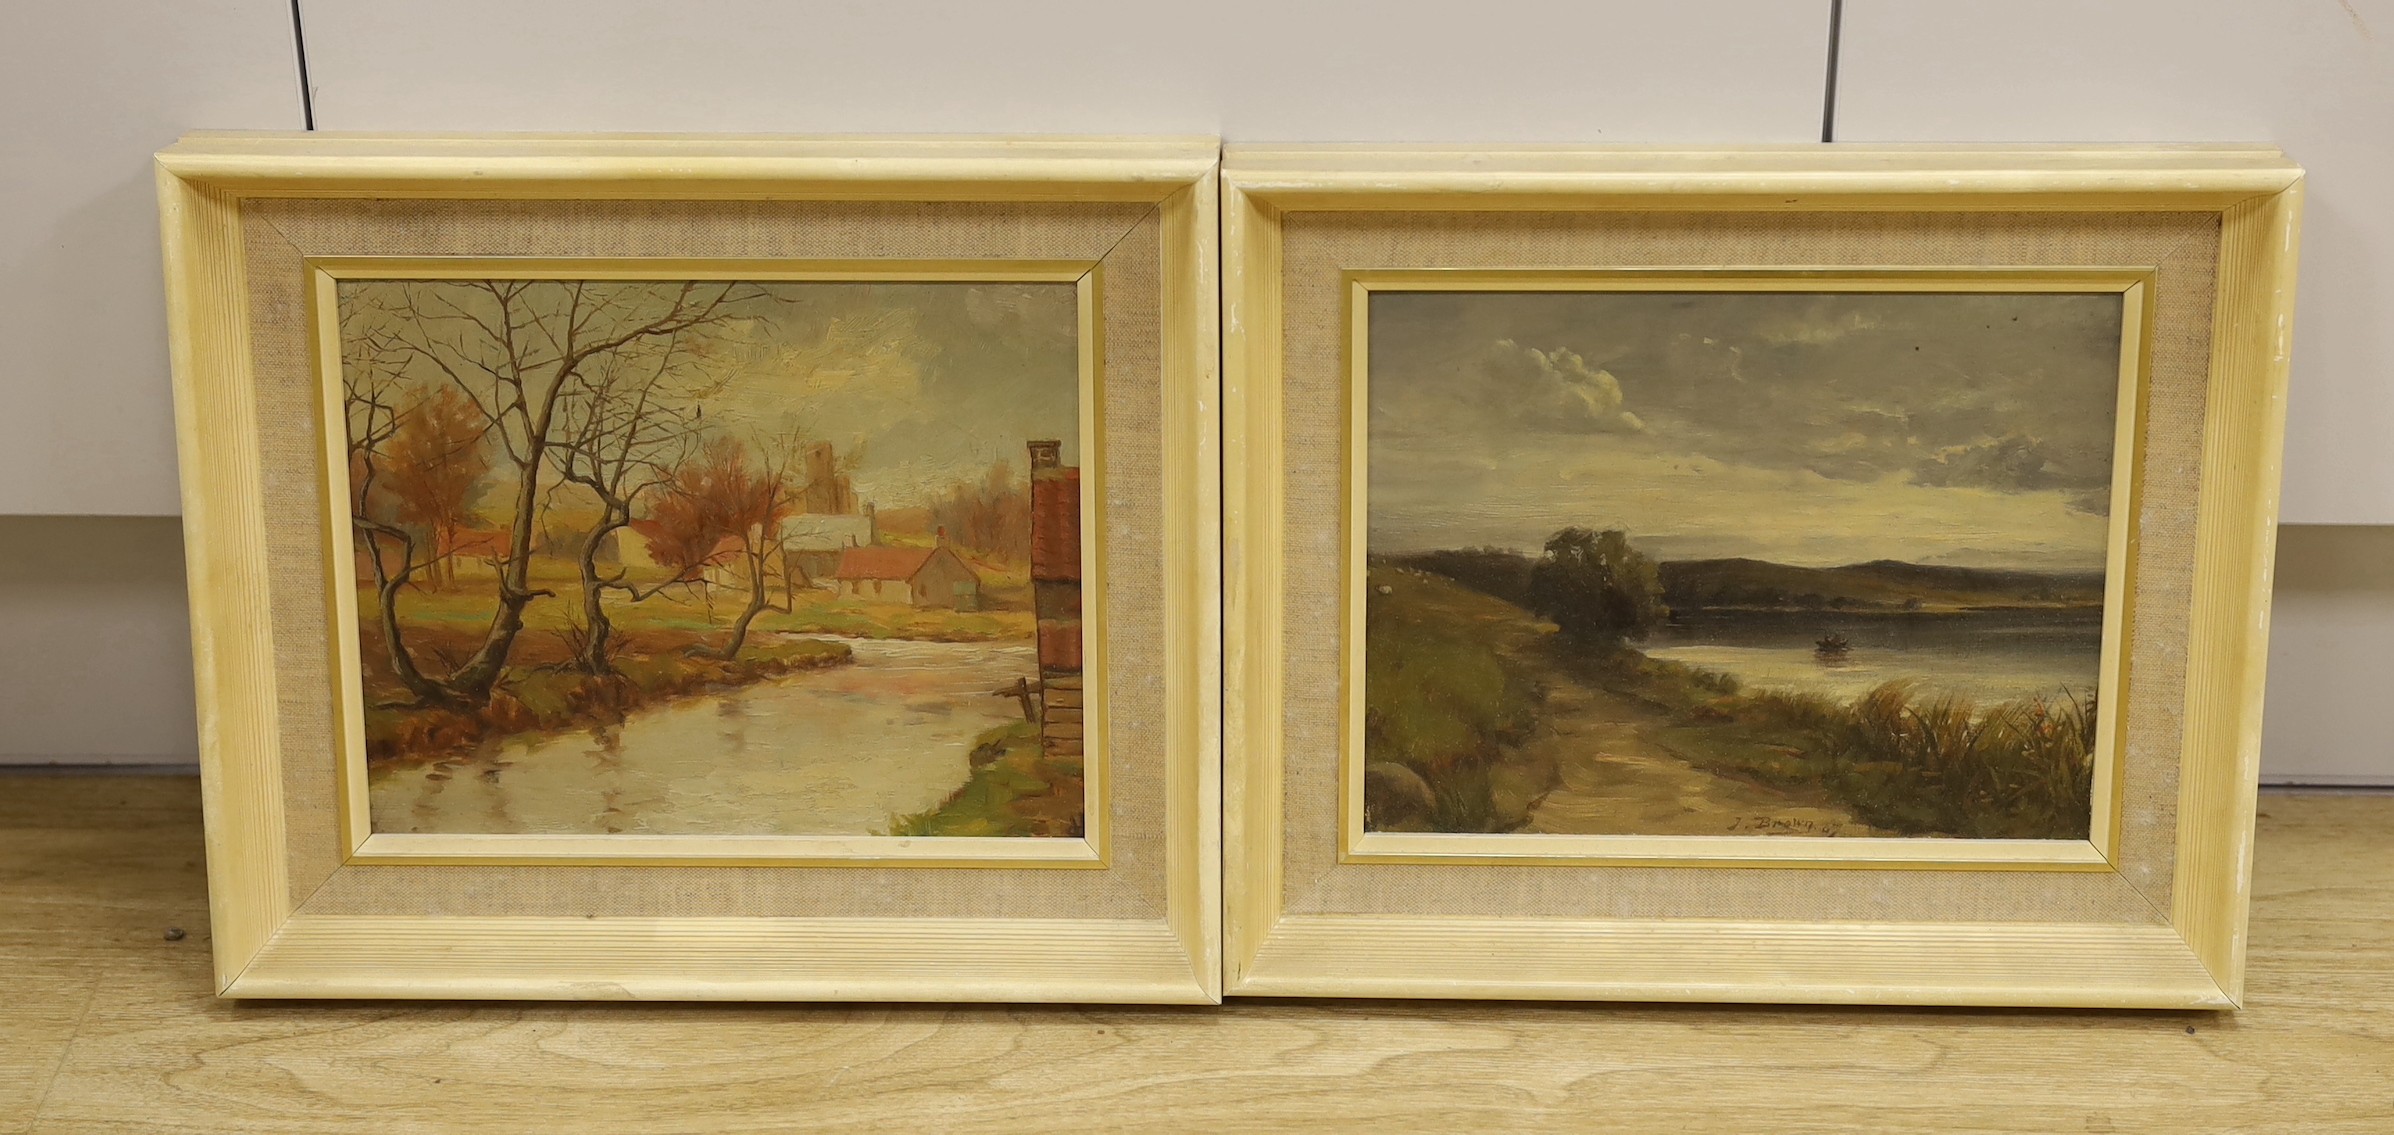 English School, late 20th century, two oil on boards, a river scene and a stream, one monogrammed and the other signed, both 20 x 25cm